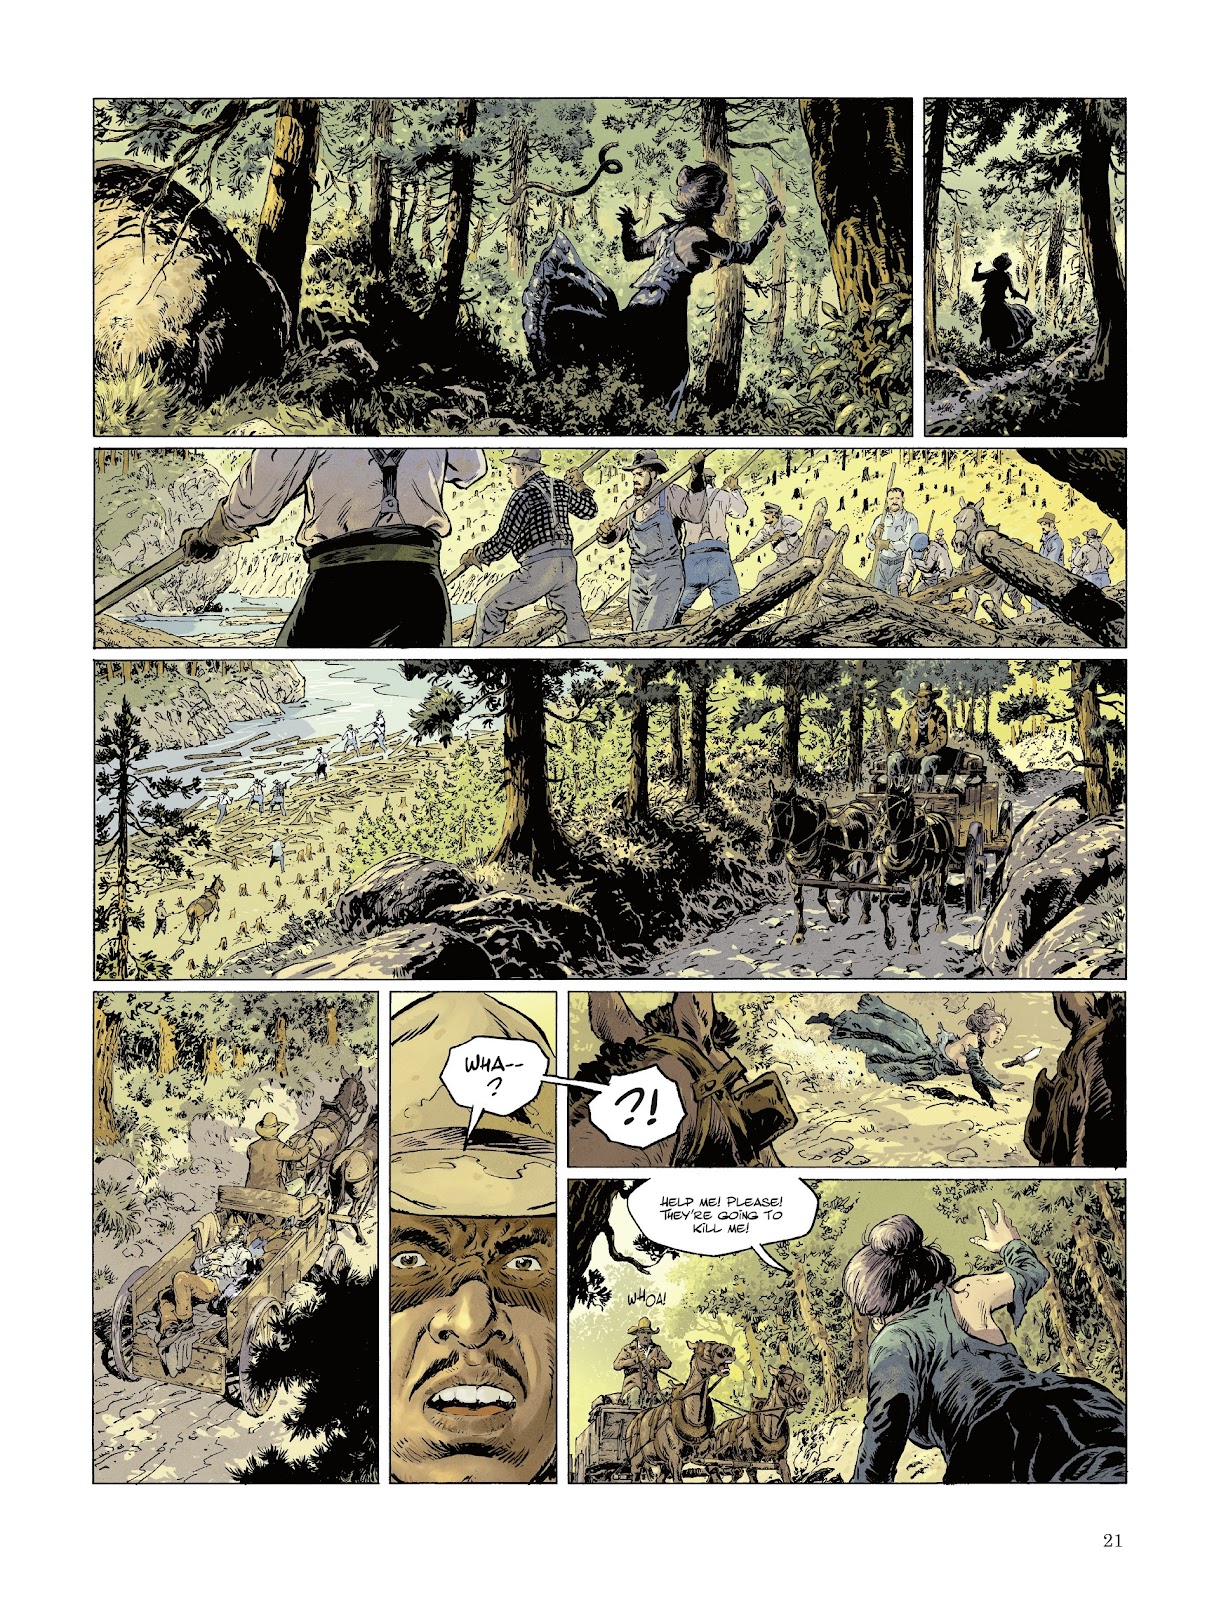 The Tiger Awakens: The Return of John Chinaman issue 1 - Page 22